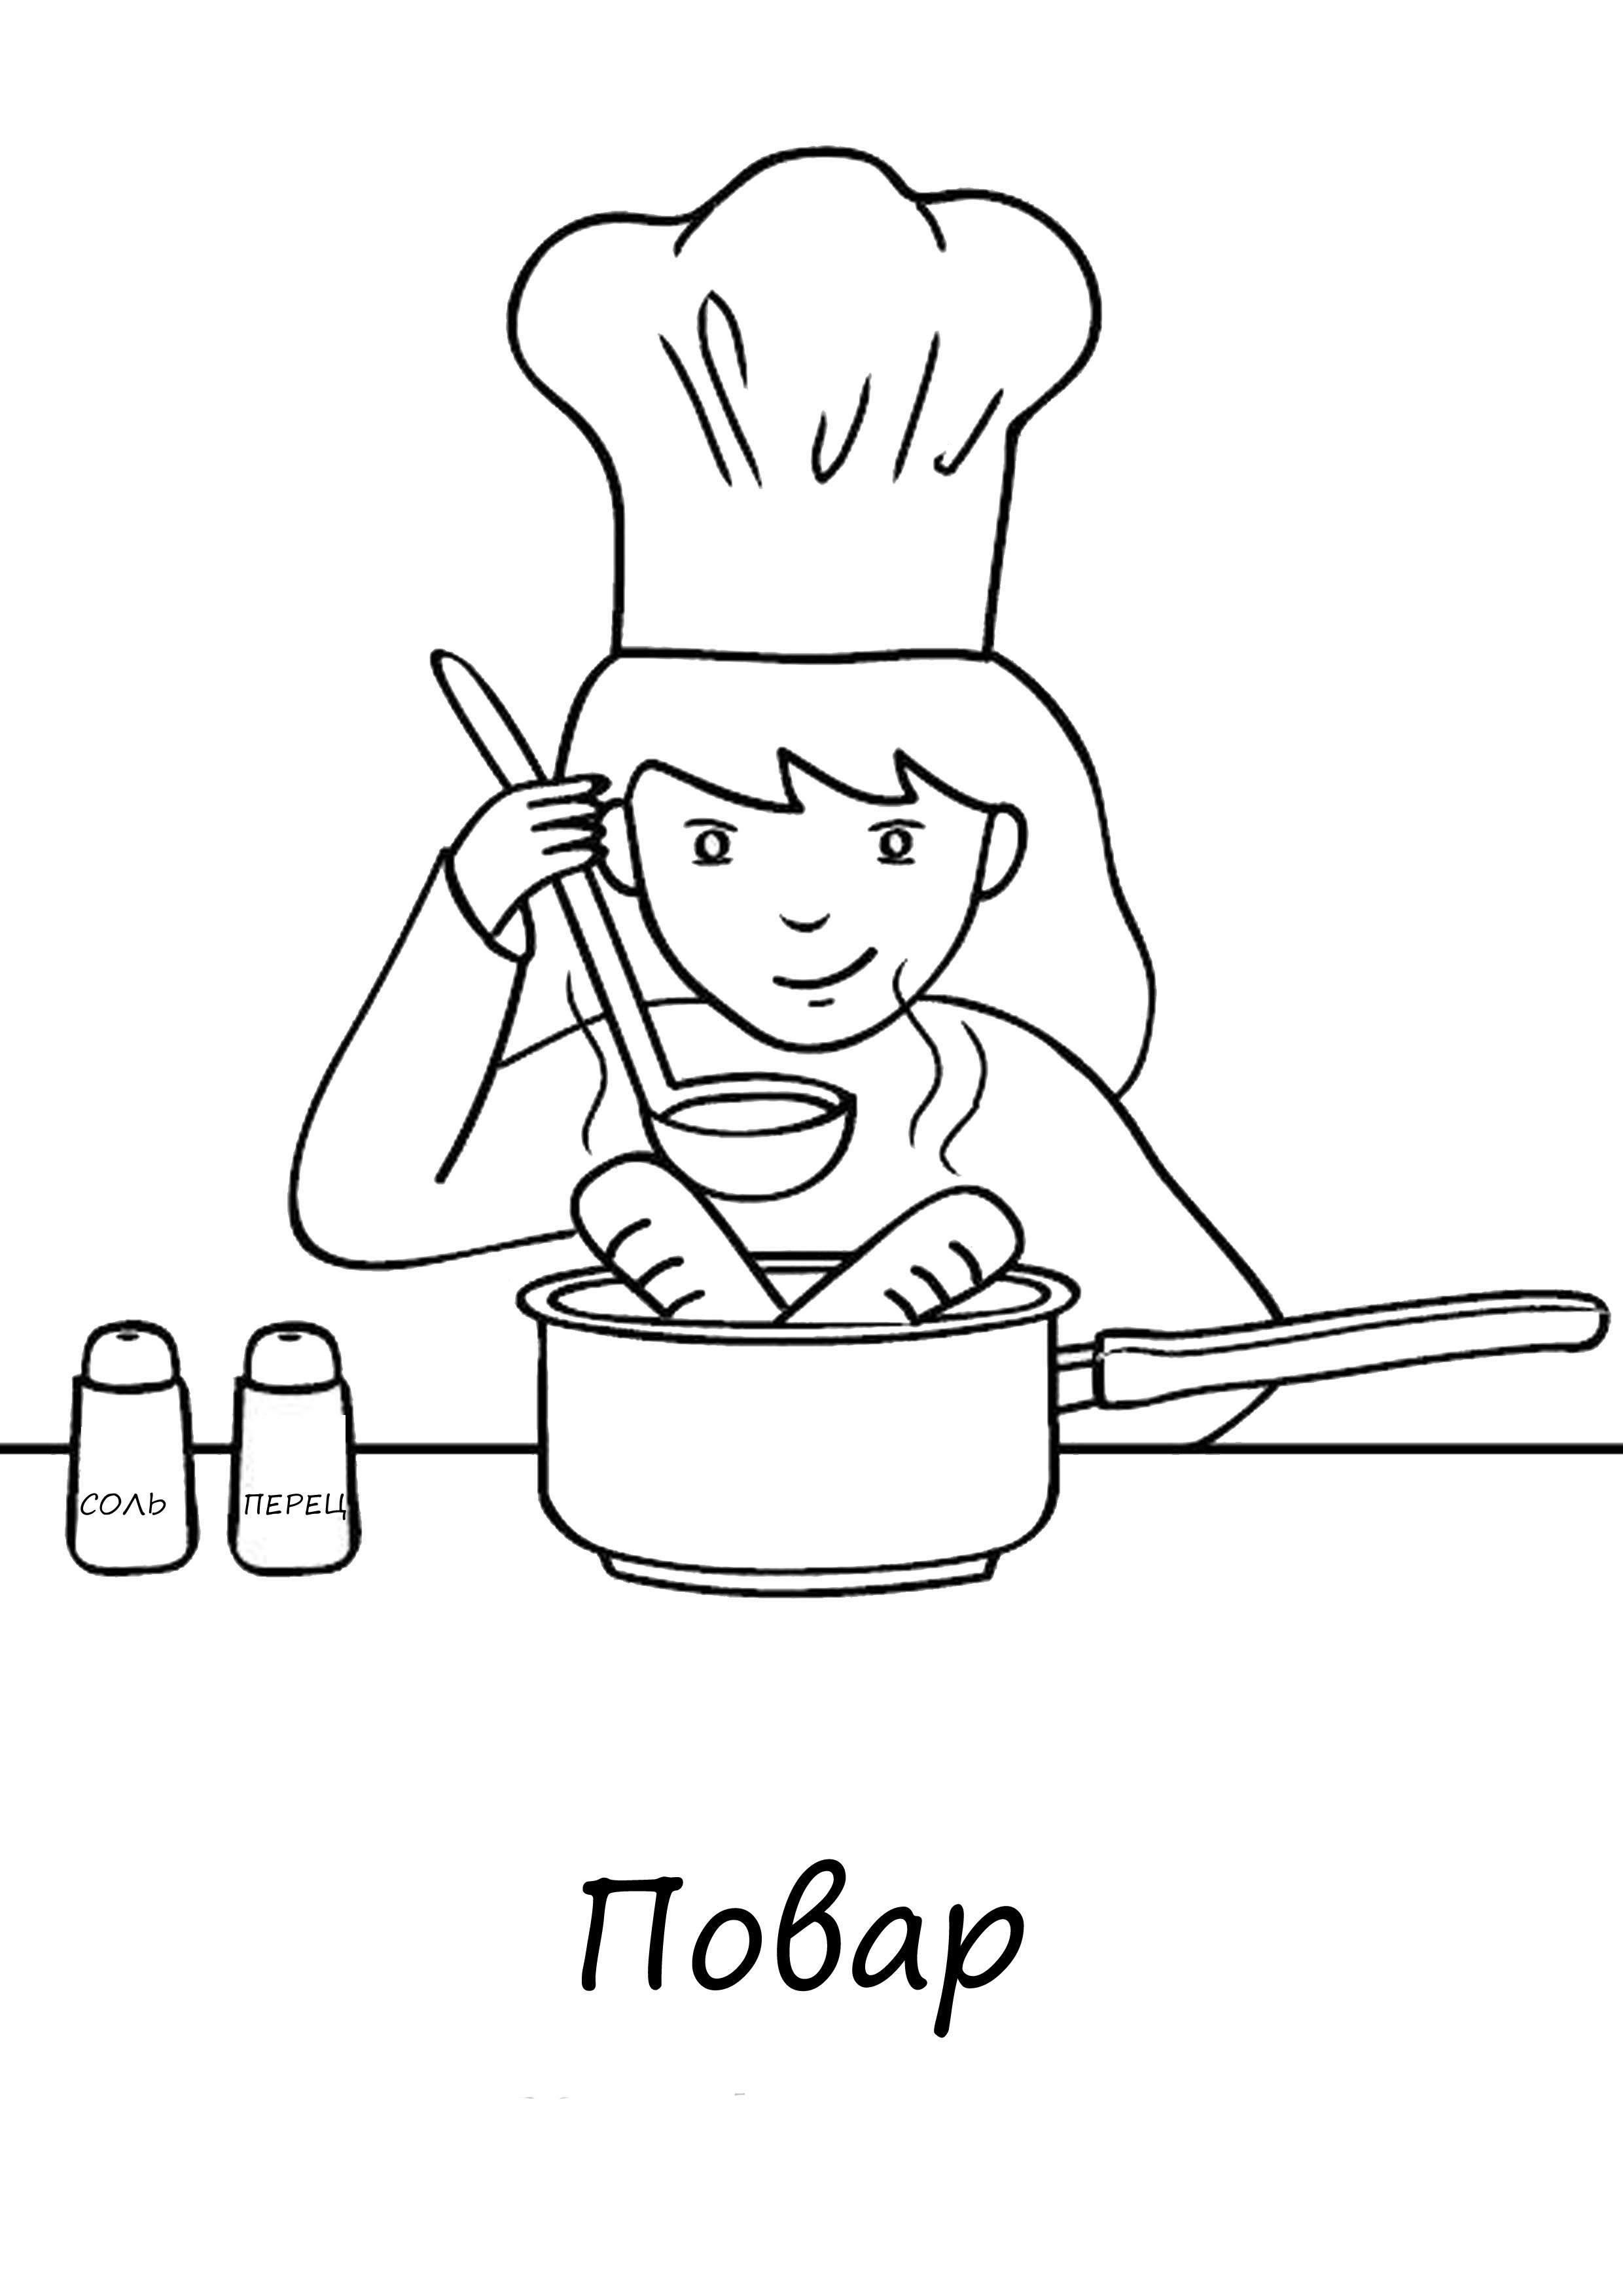 Cook coloring pages to download and print for free